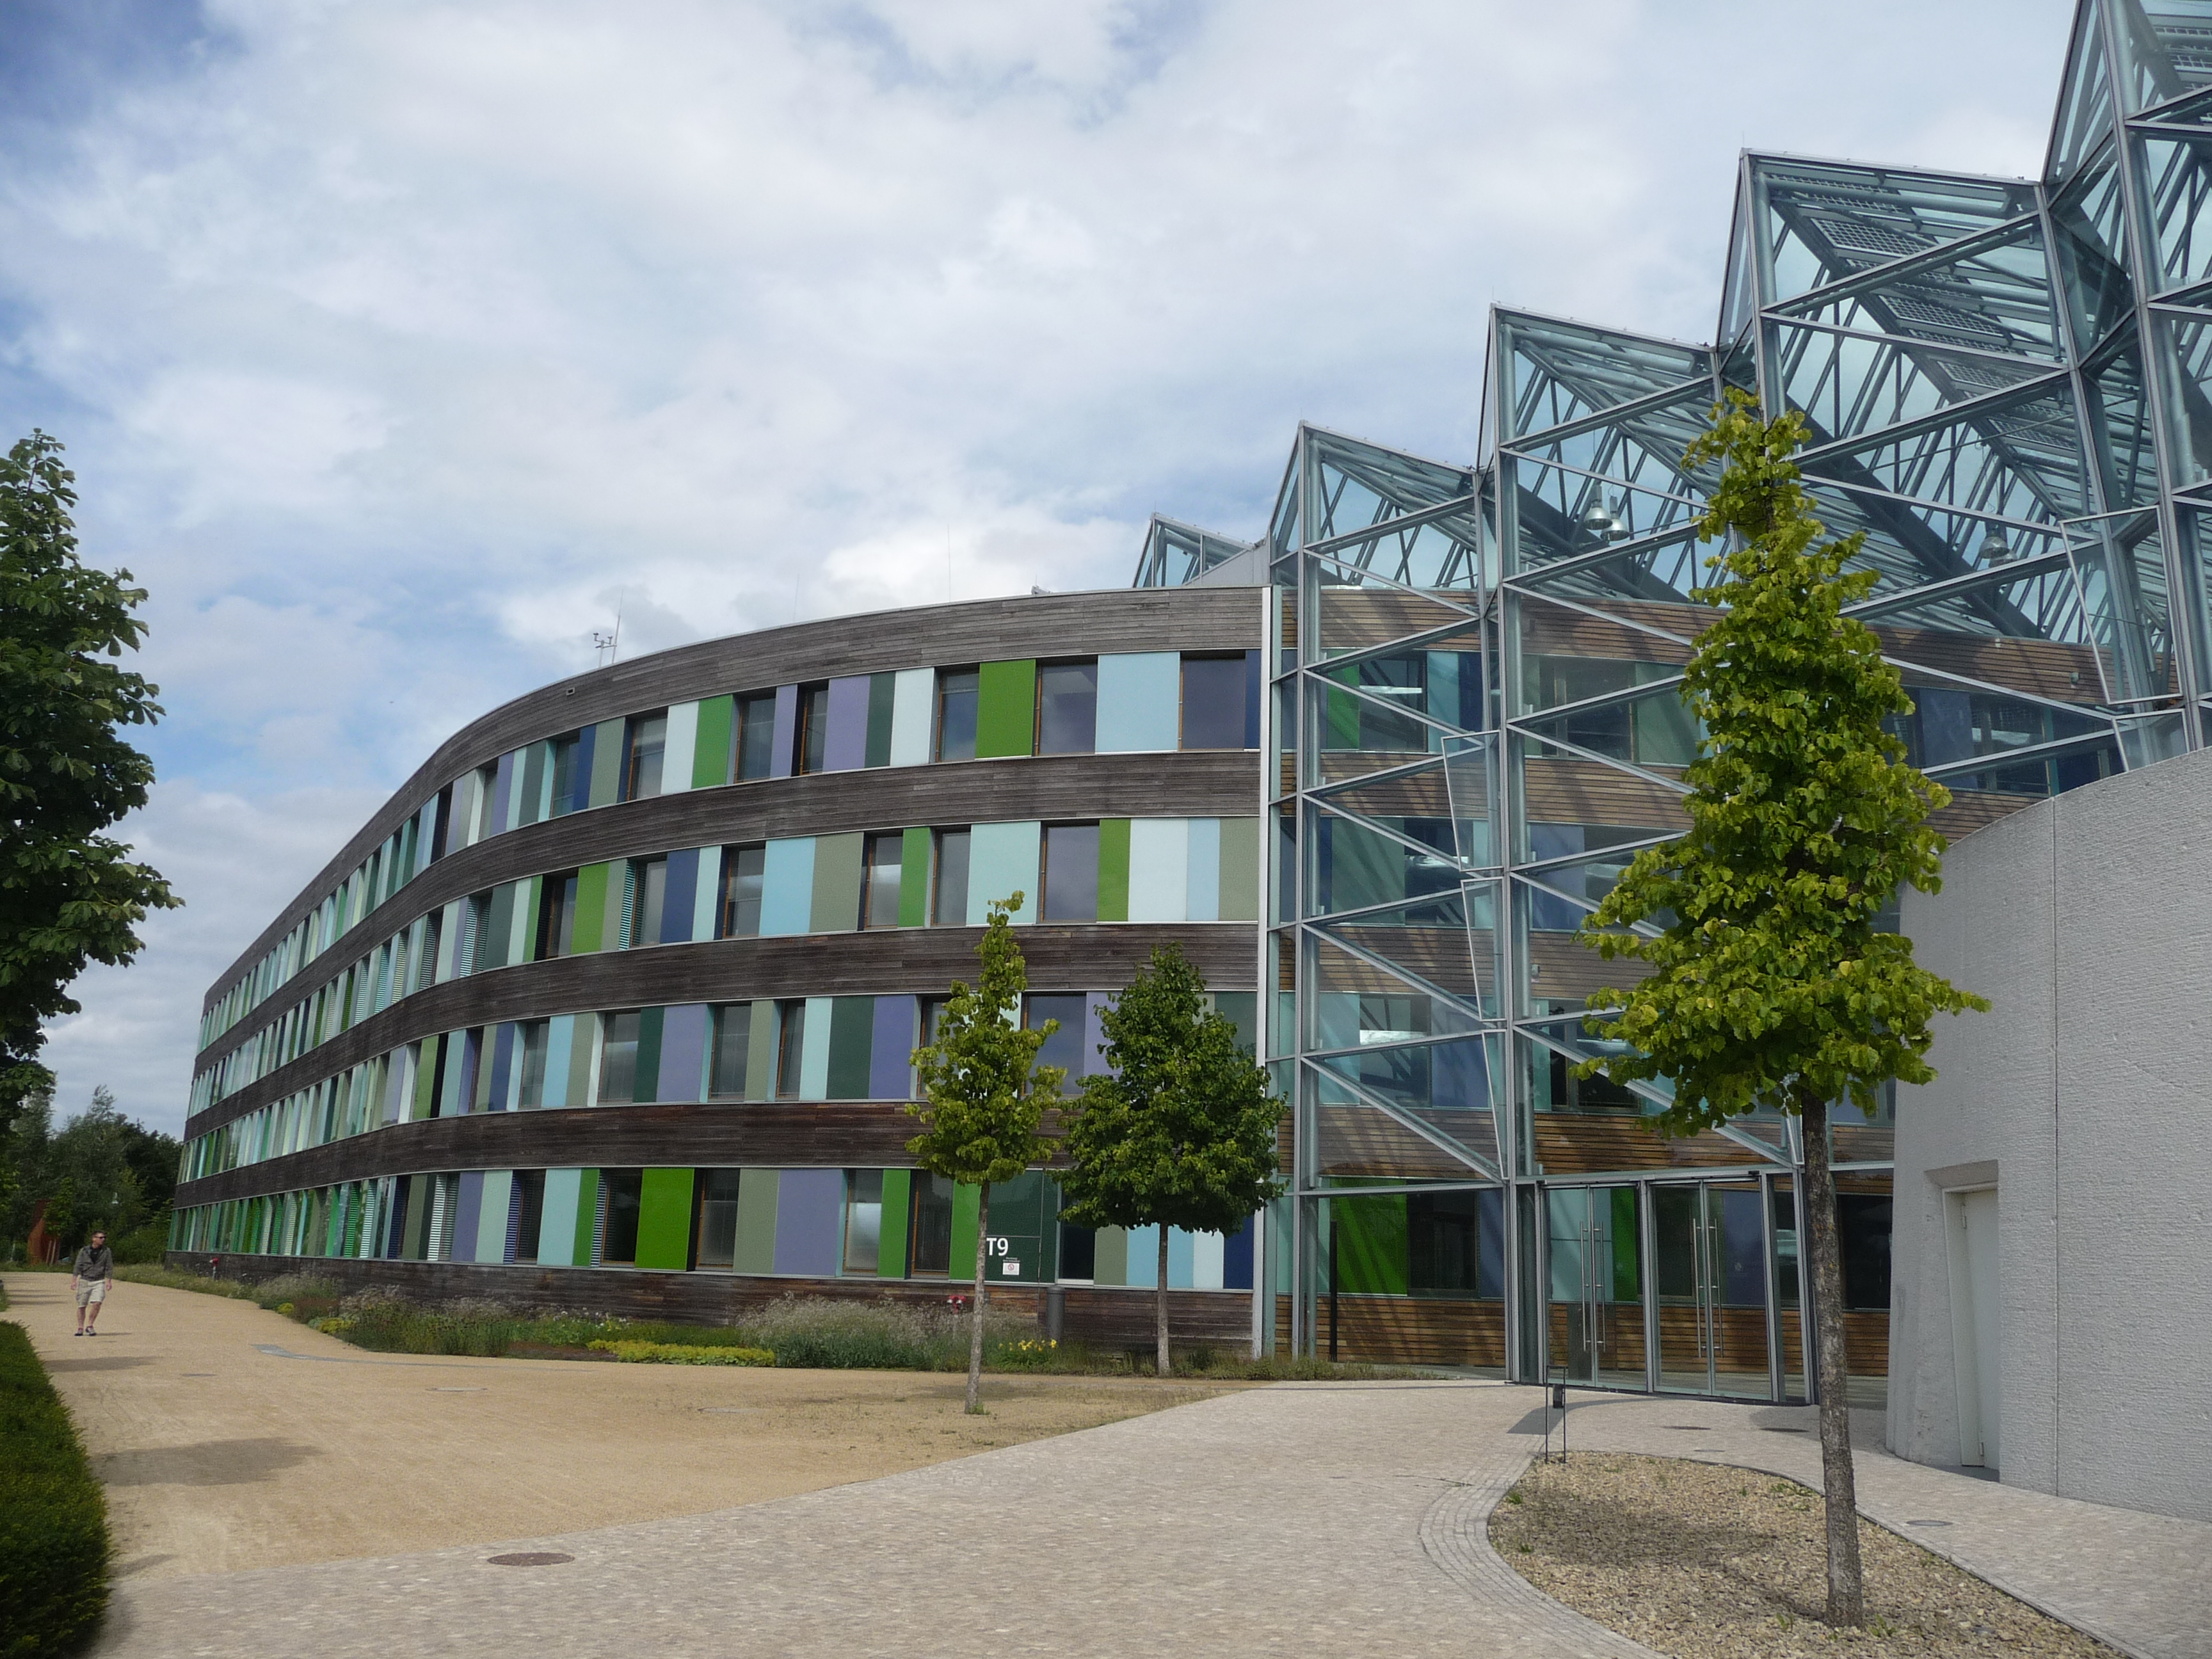 Main entrance of UBA office building in Dessau-Roßlau with glass façade. The remaining façade is made of wood, windows, and glass slabs in shades of green and blue